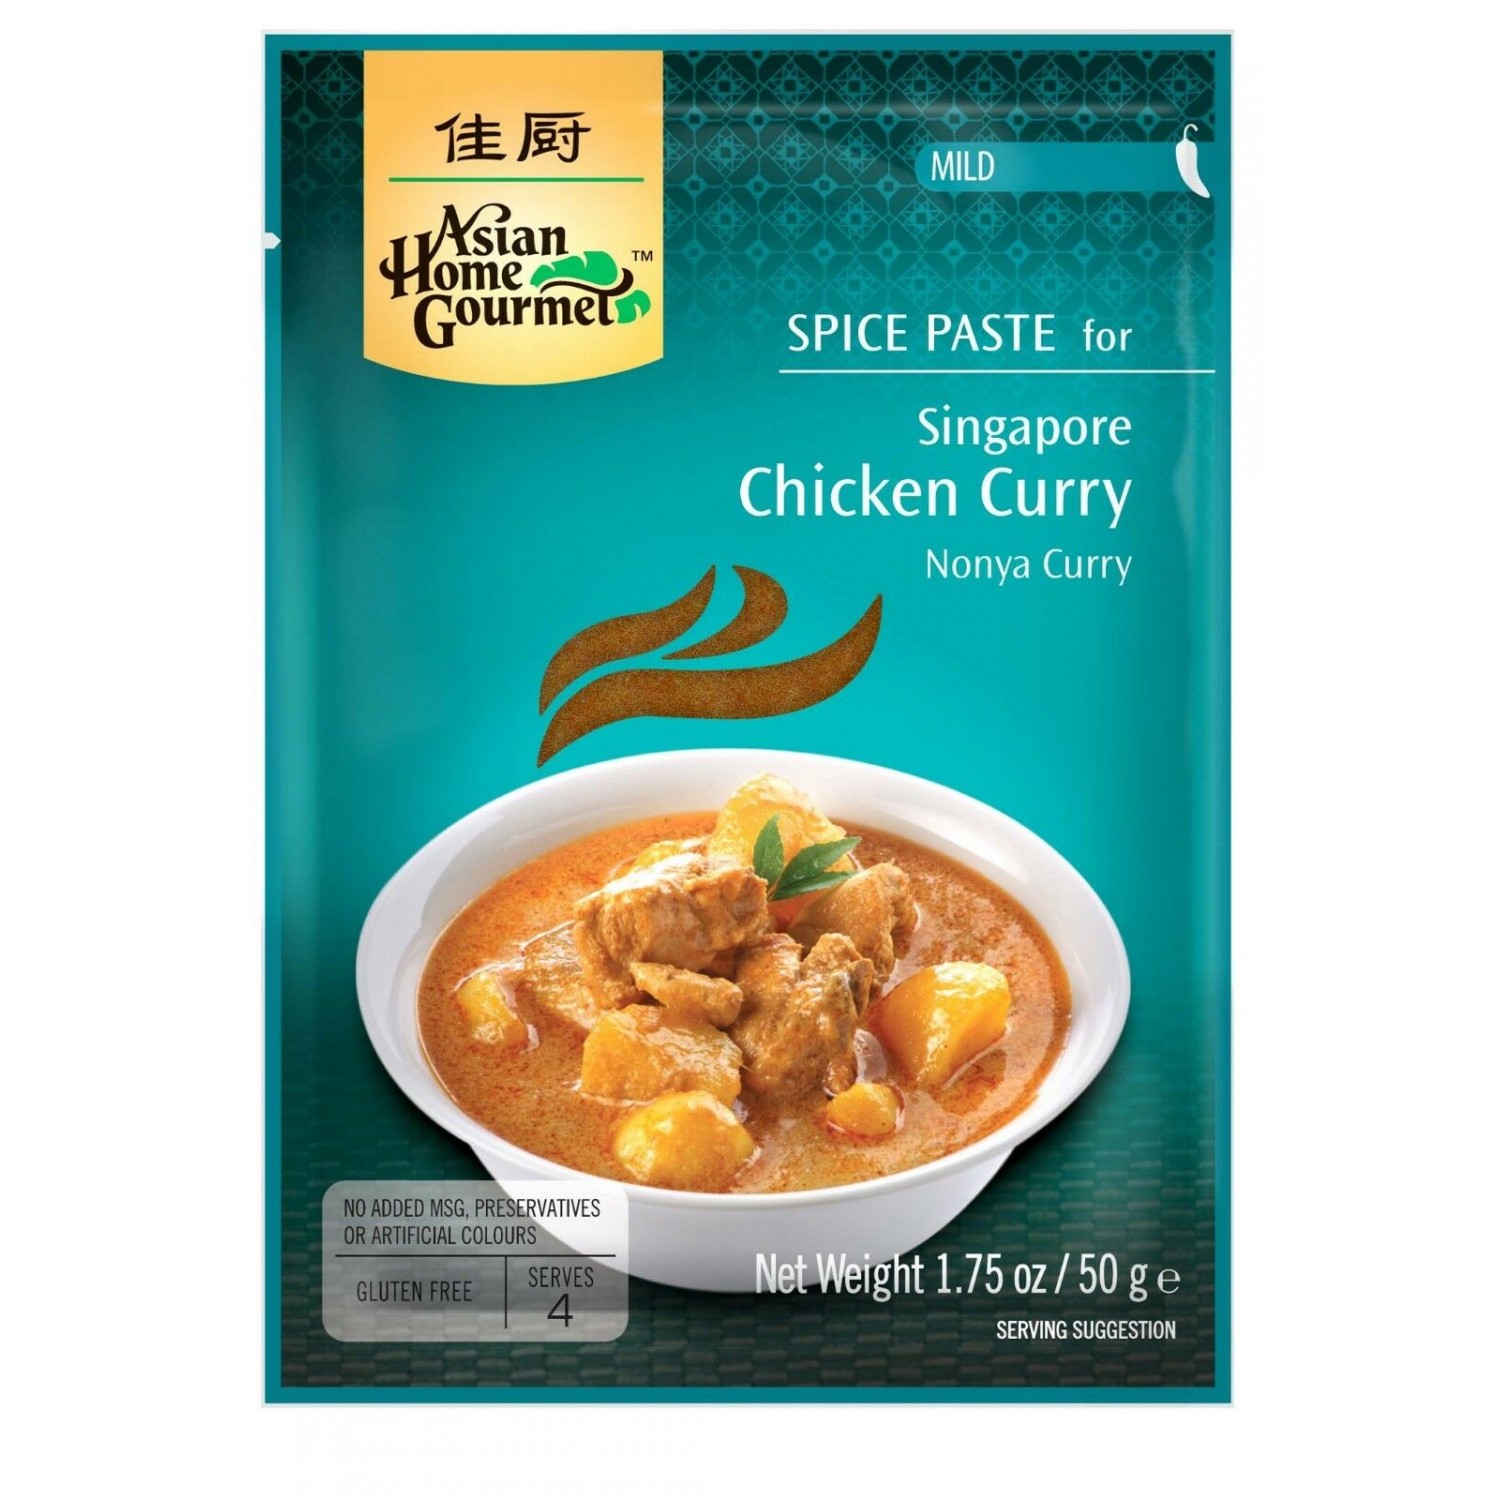 Asian Home Gourmet Spice paste for Singapore Chicken Curry 50g Nonya Curry Paste